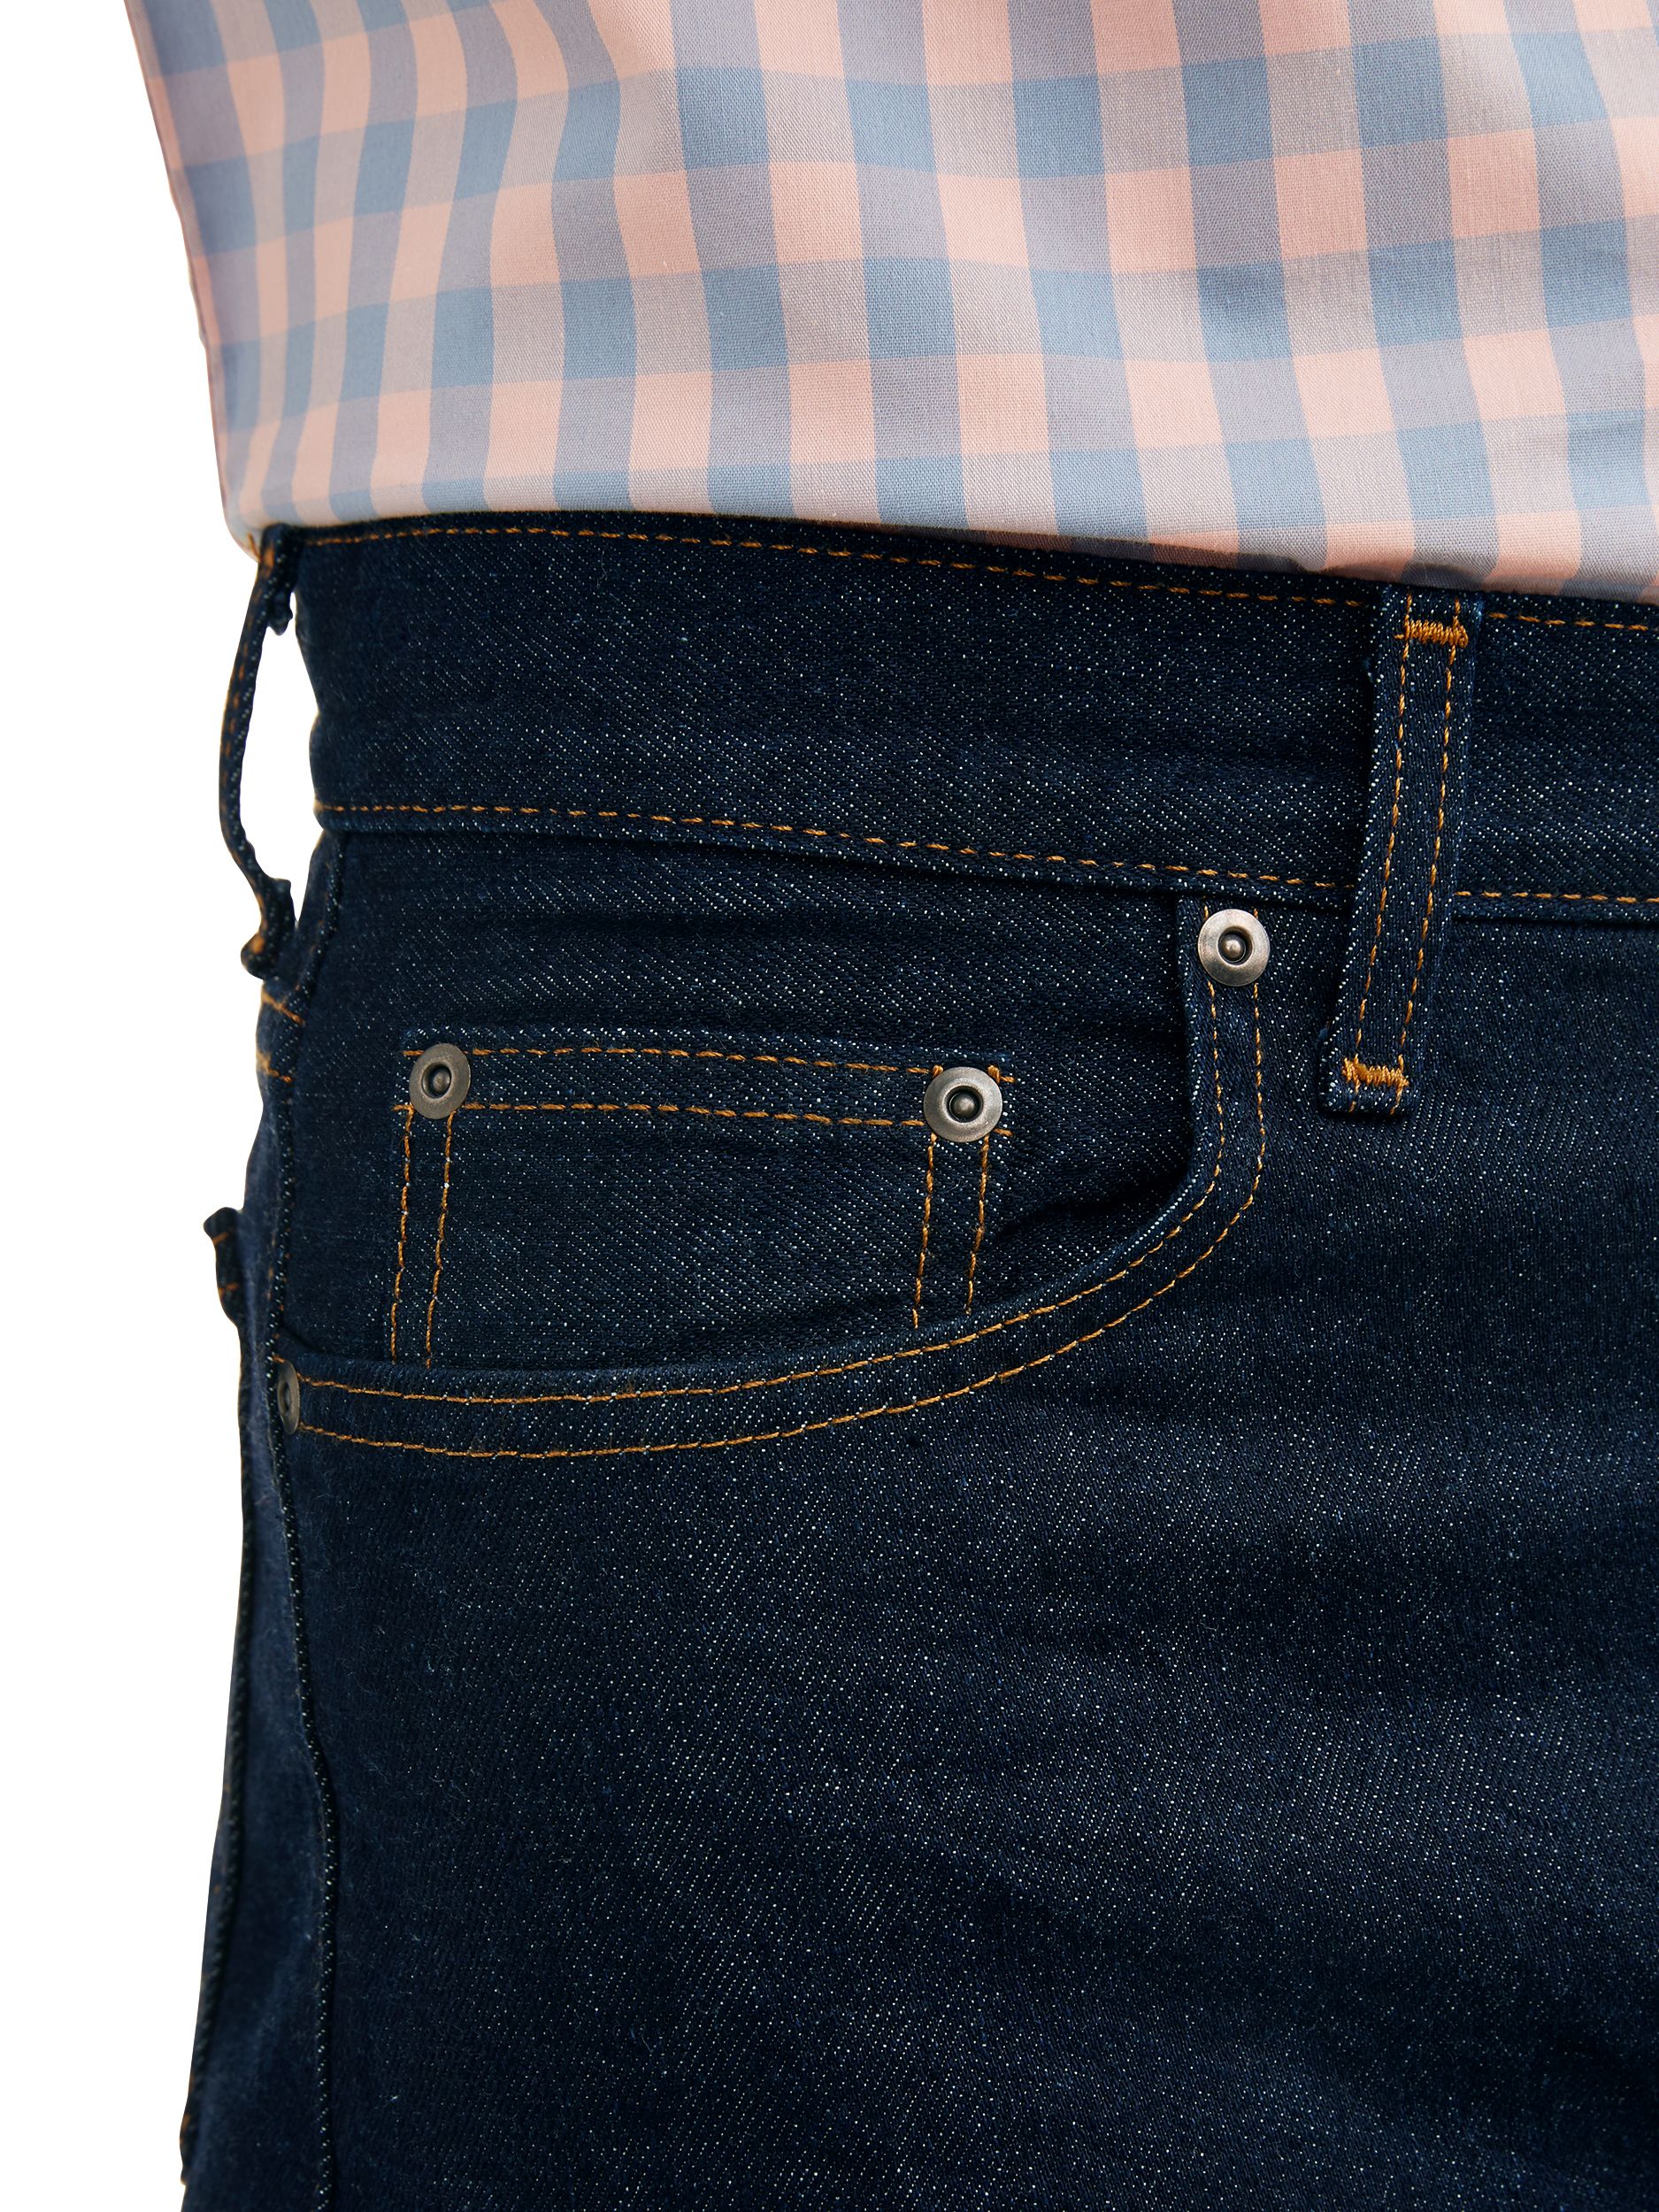 George Men's and Big Men's 100% Cotton Relaxed Fit Jeans - image 3 of 6